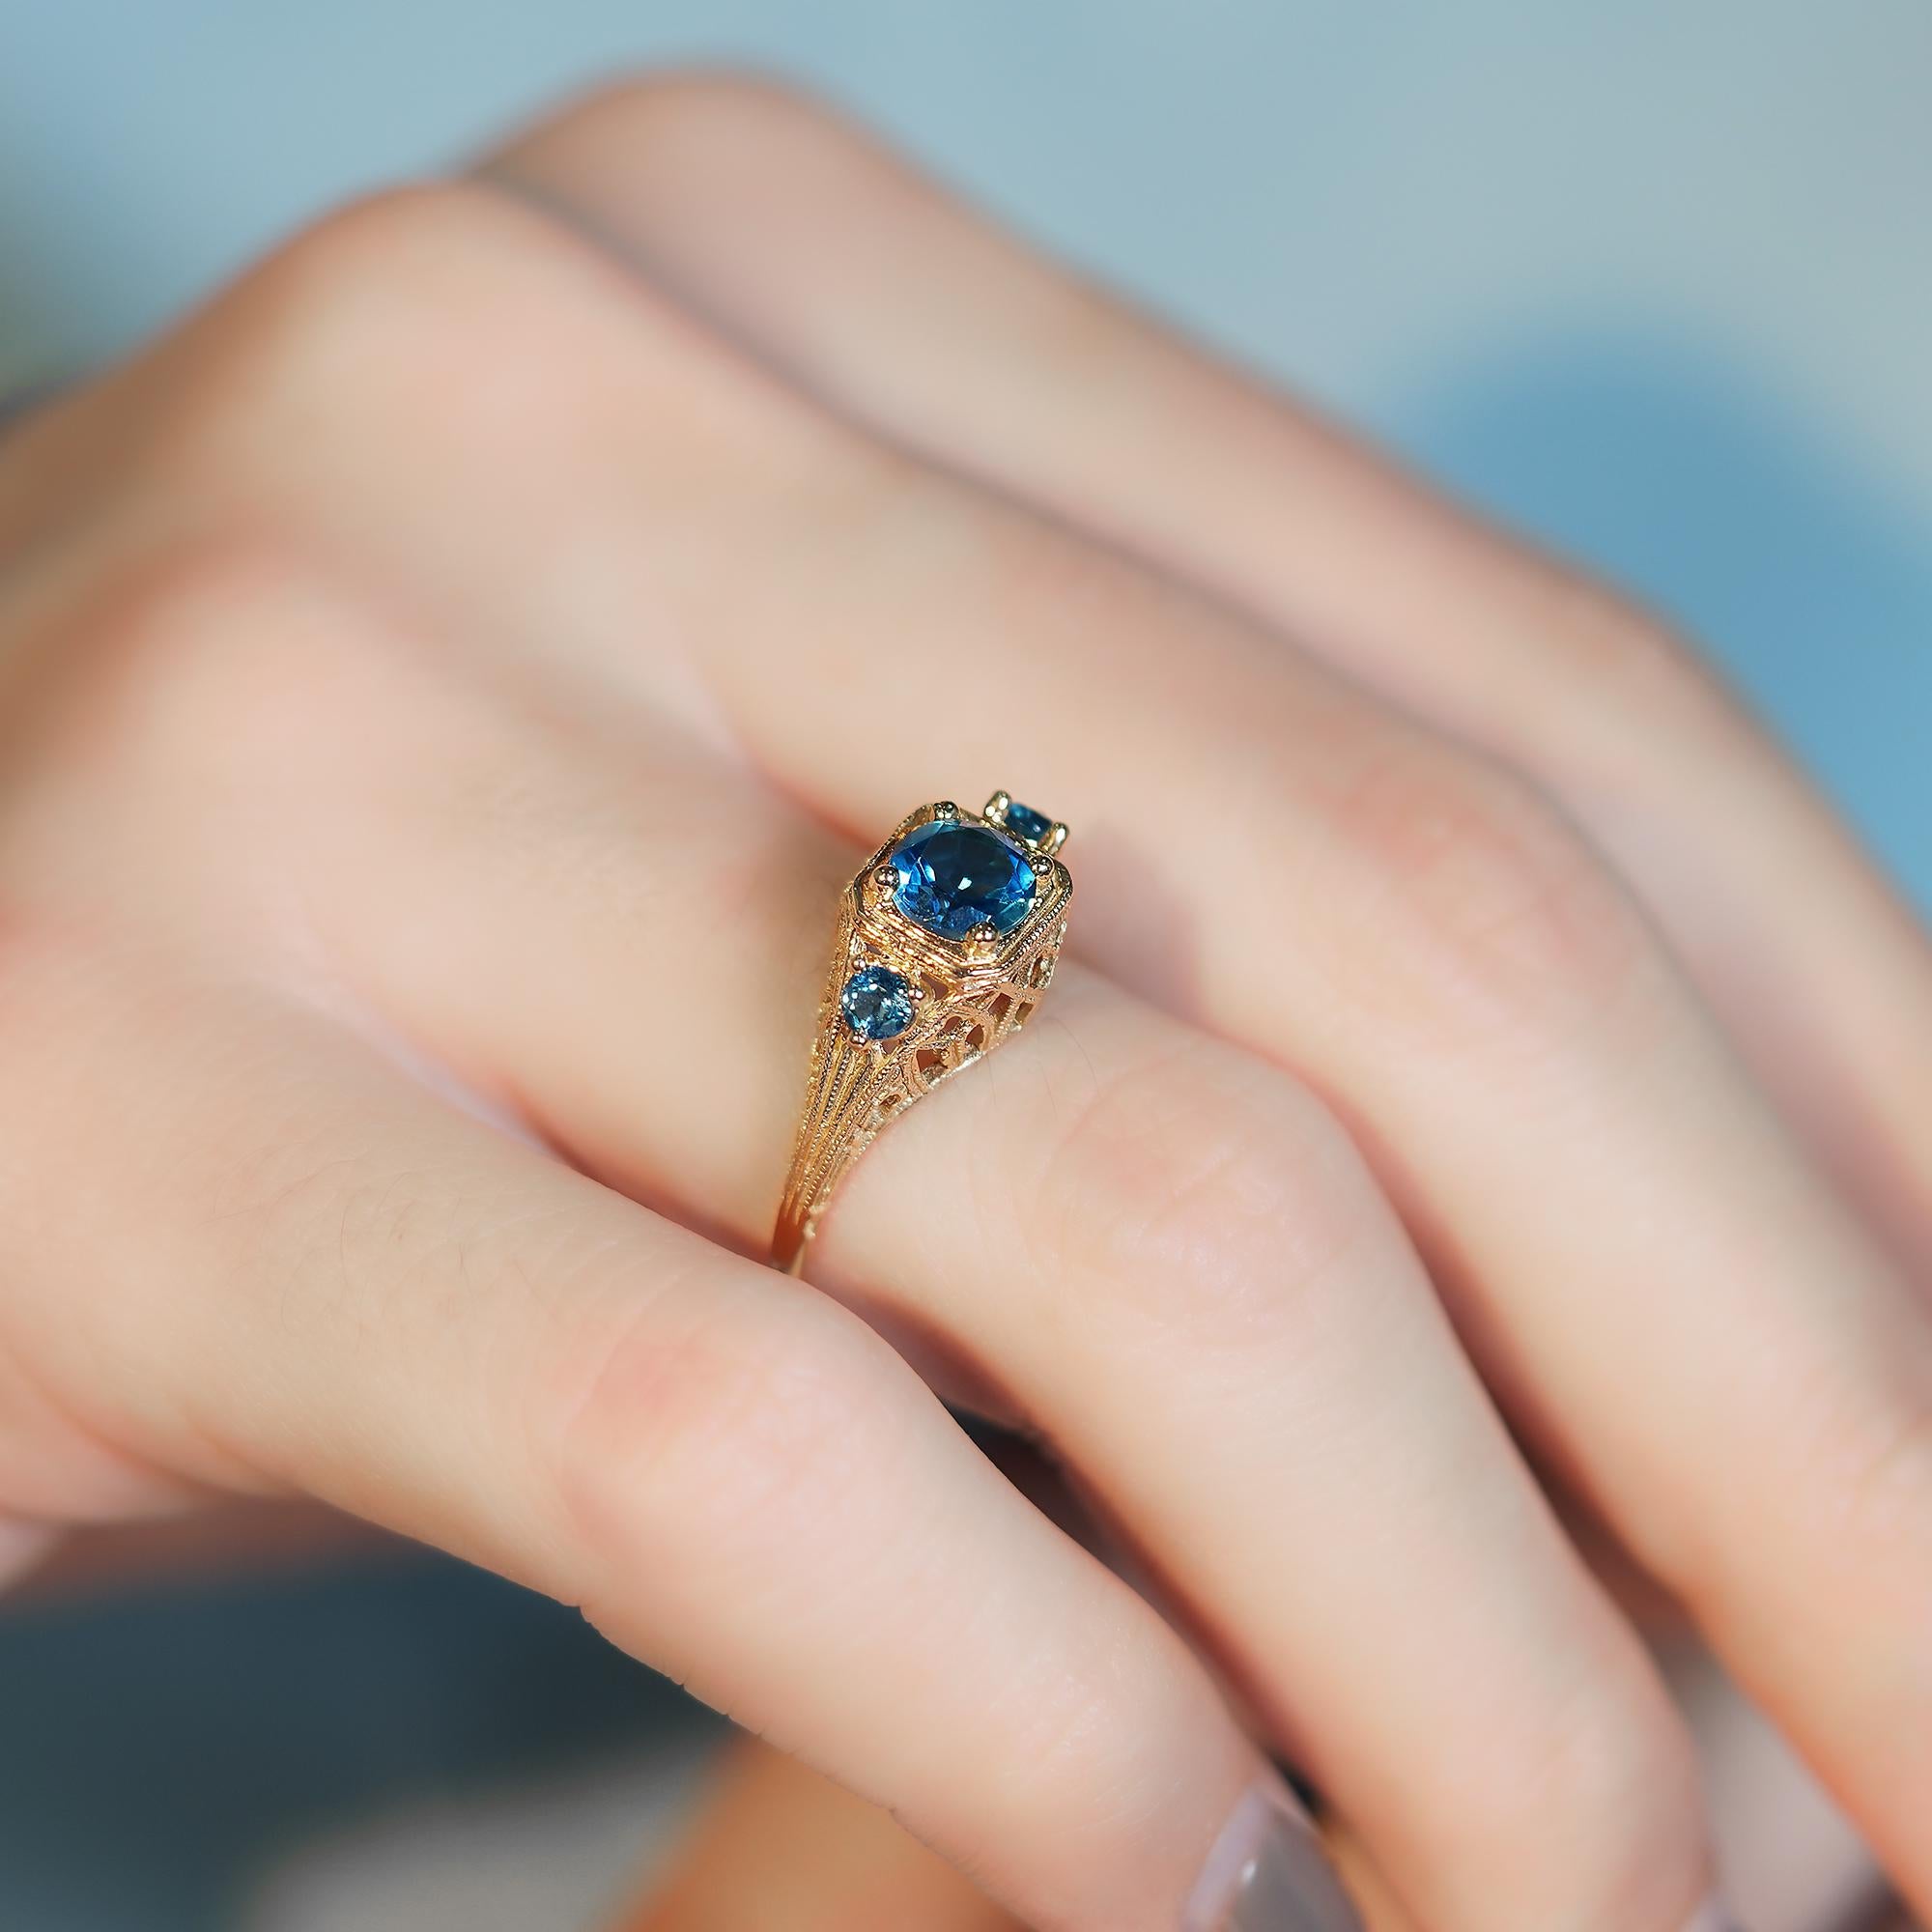 For Sale:  Natural London Blue Topaz Vintage Style Filigree Three Stone Ring in 9K Gold 7